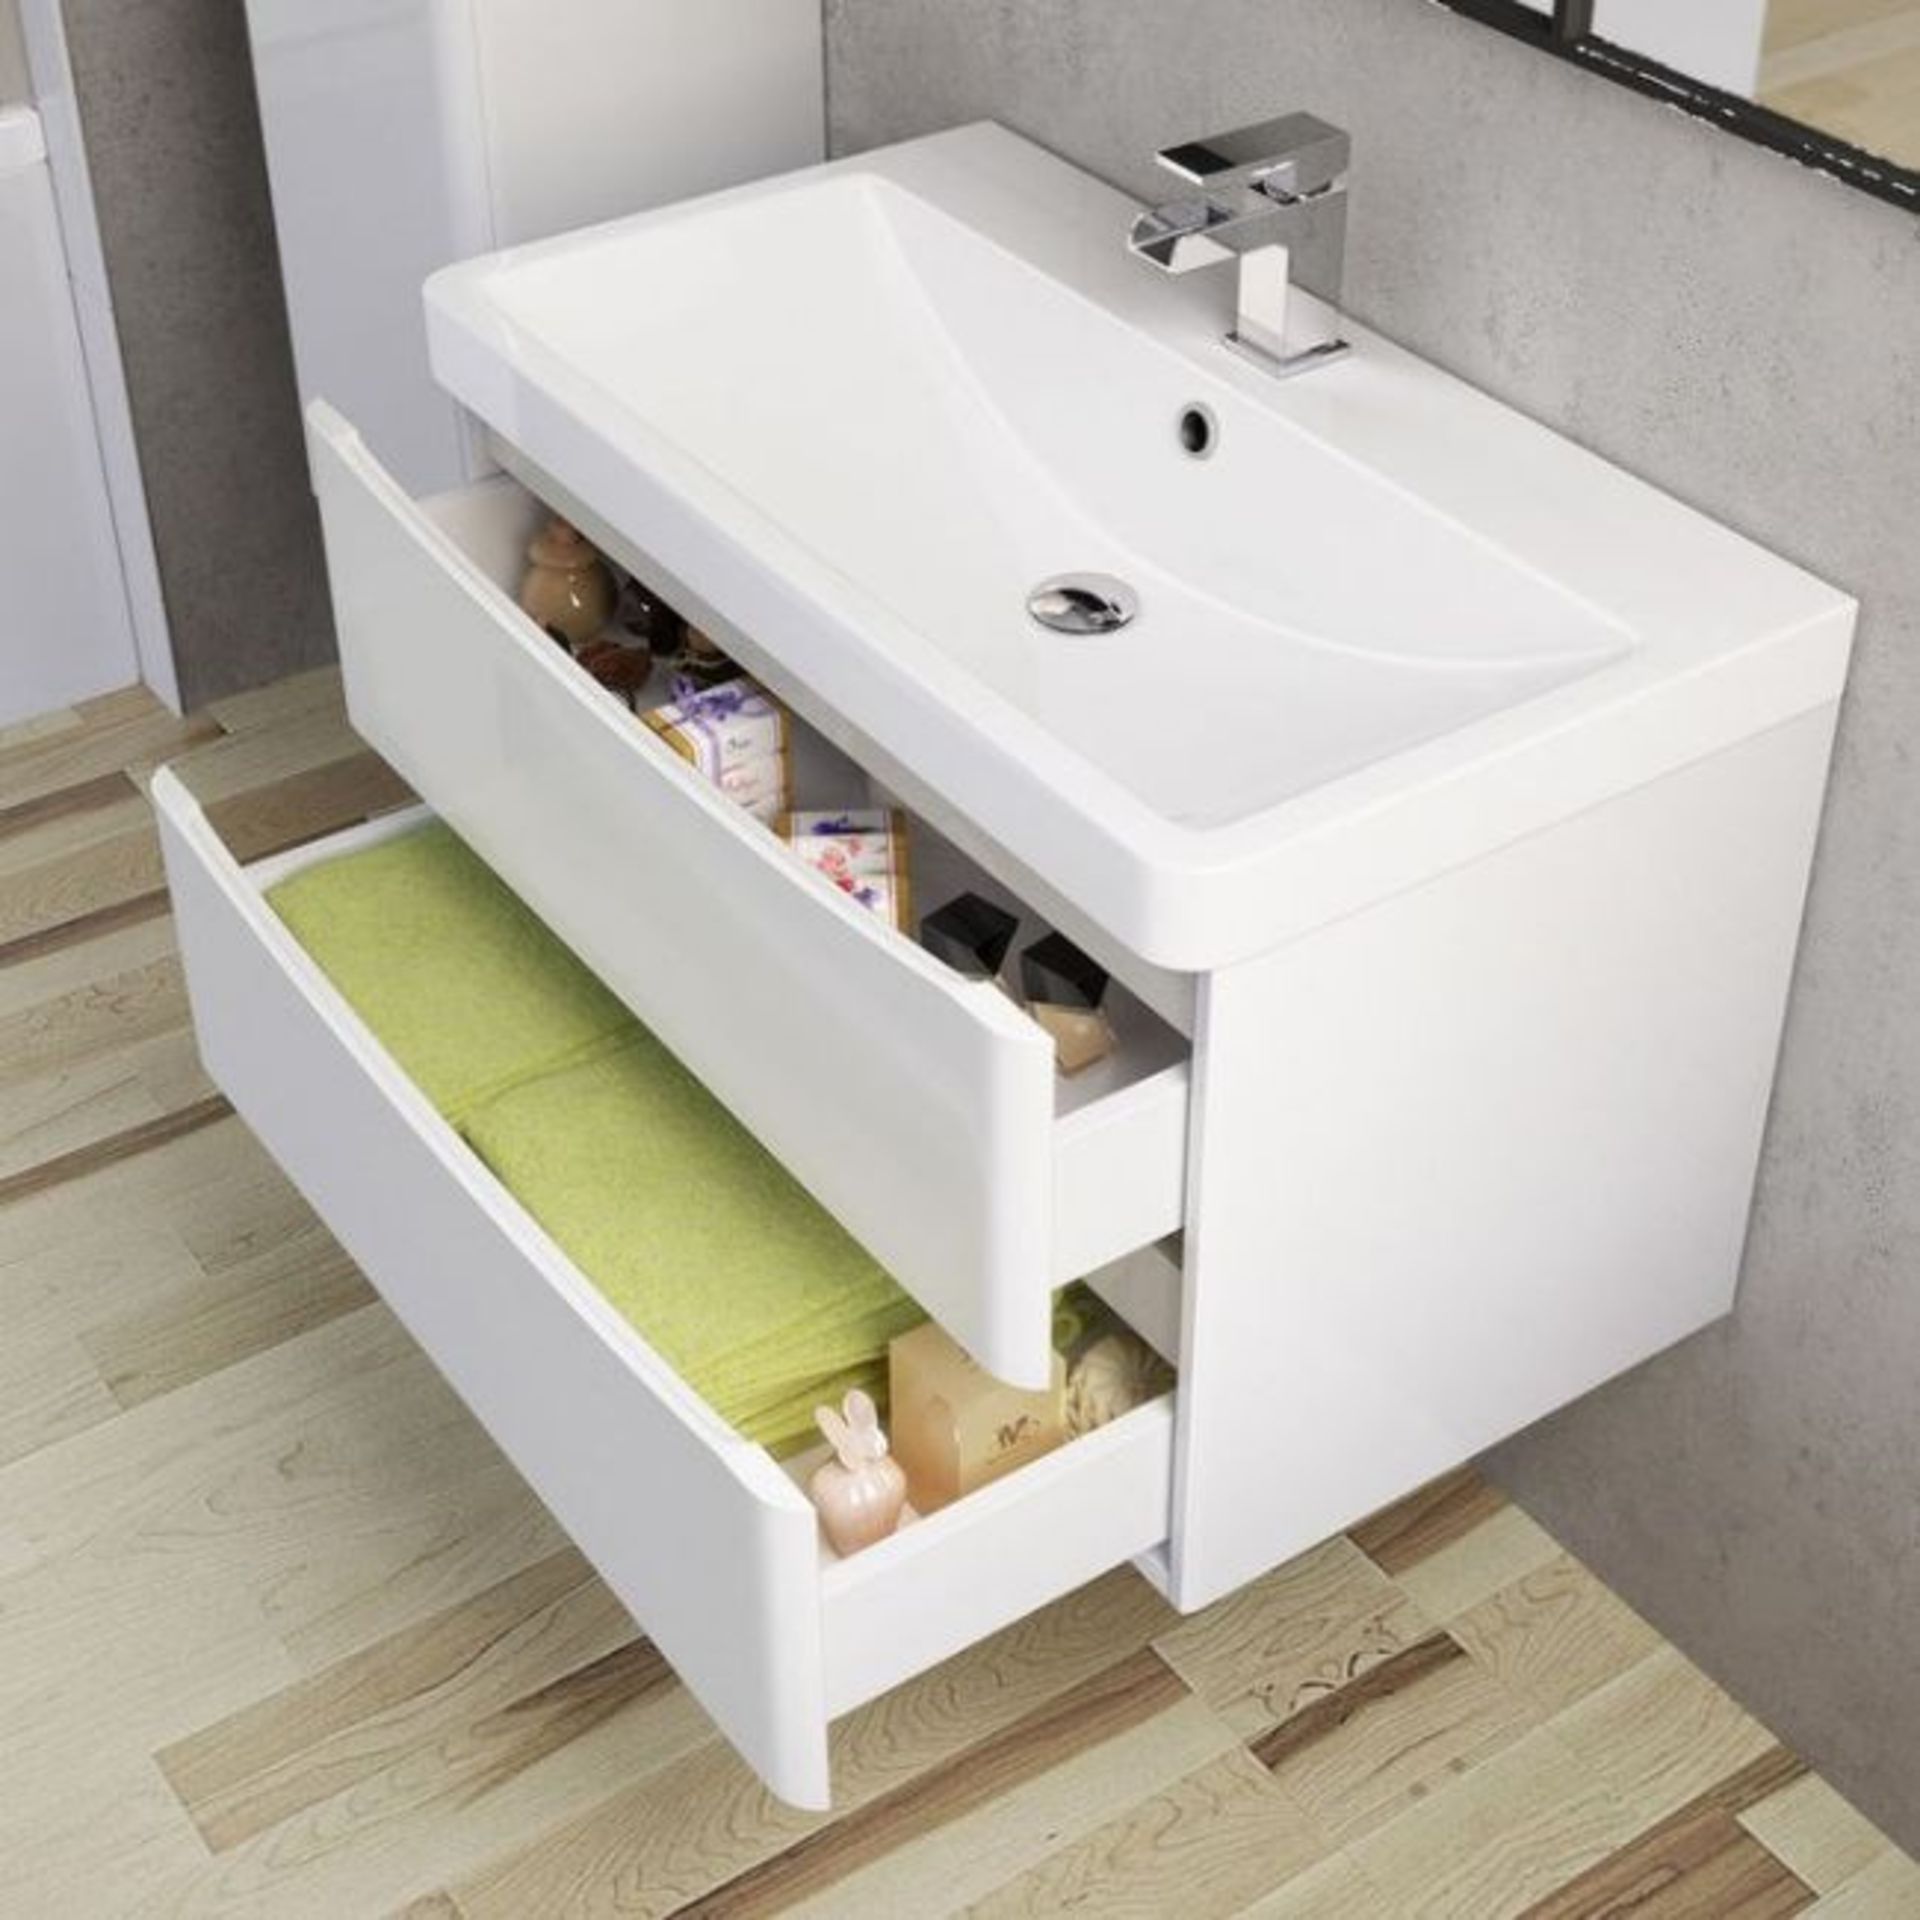 BRAND NEW BOXED 1000mm Austin II Gloss White Built In Basin Drawer Unit - Wall Hung.RRP £499.99. - Image 2 of 3